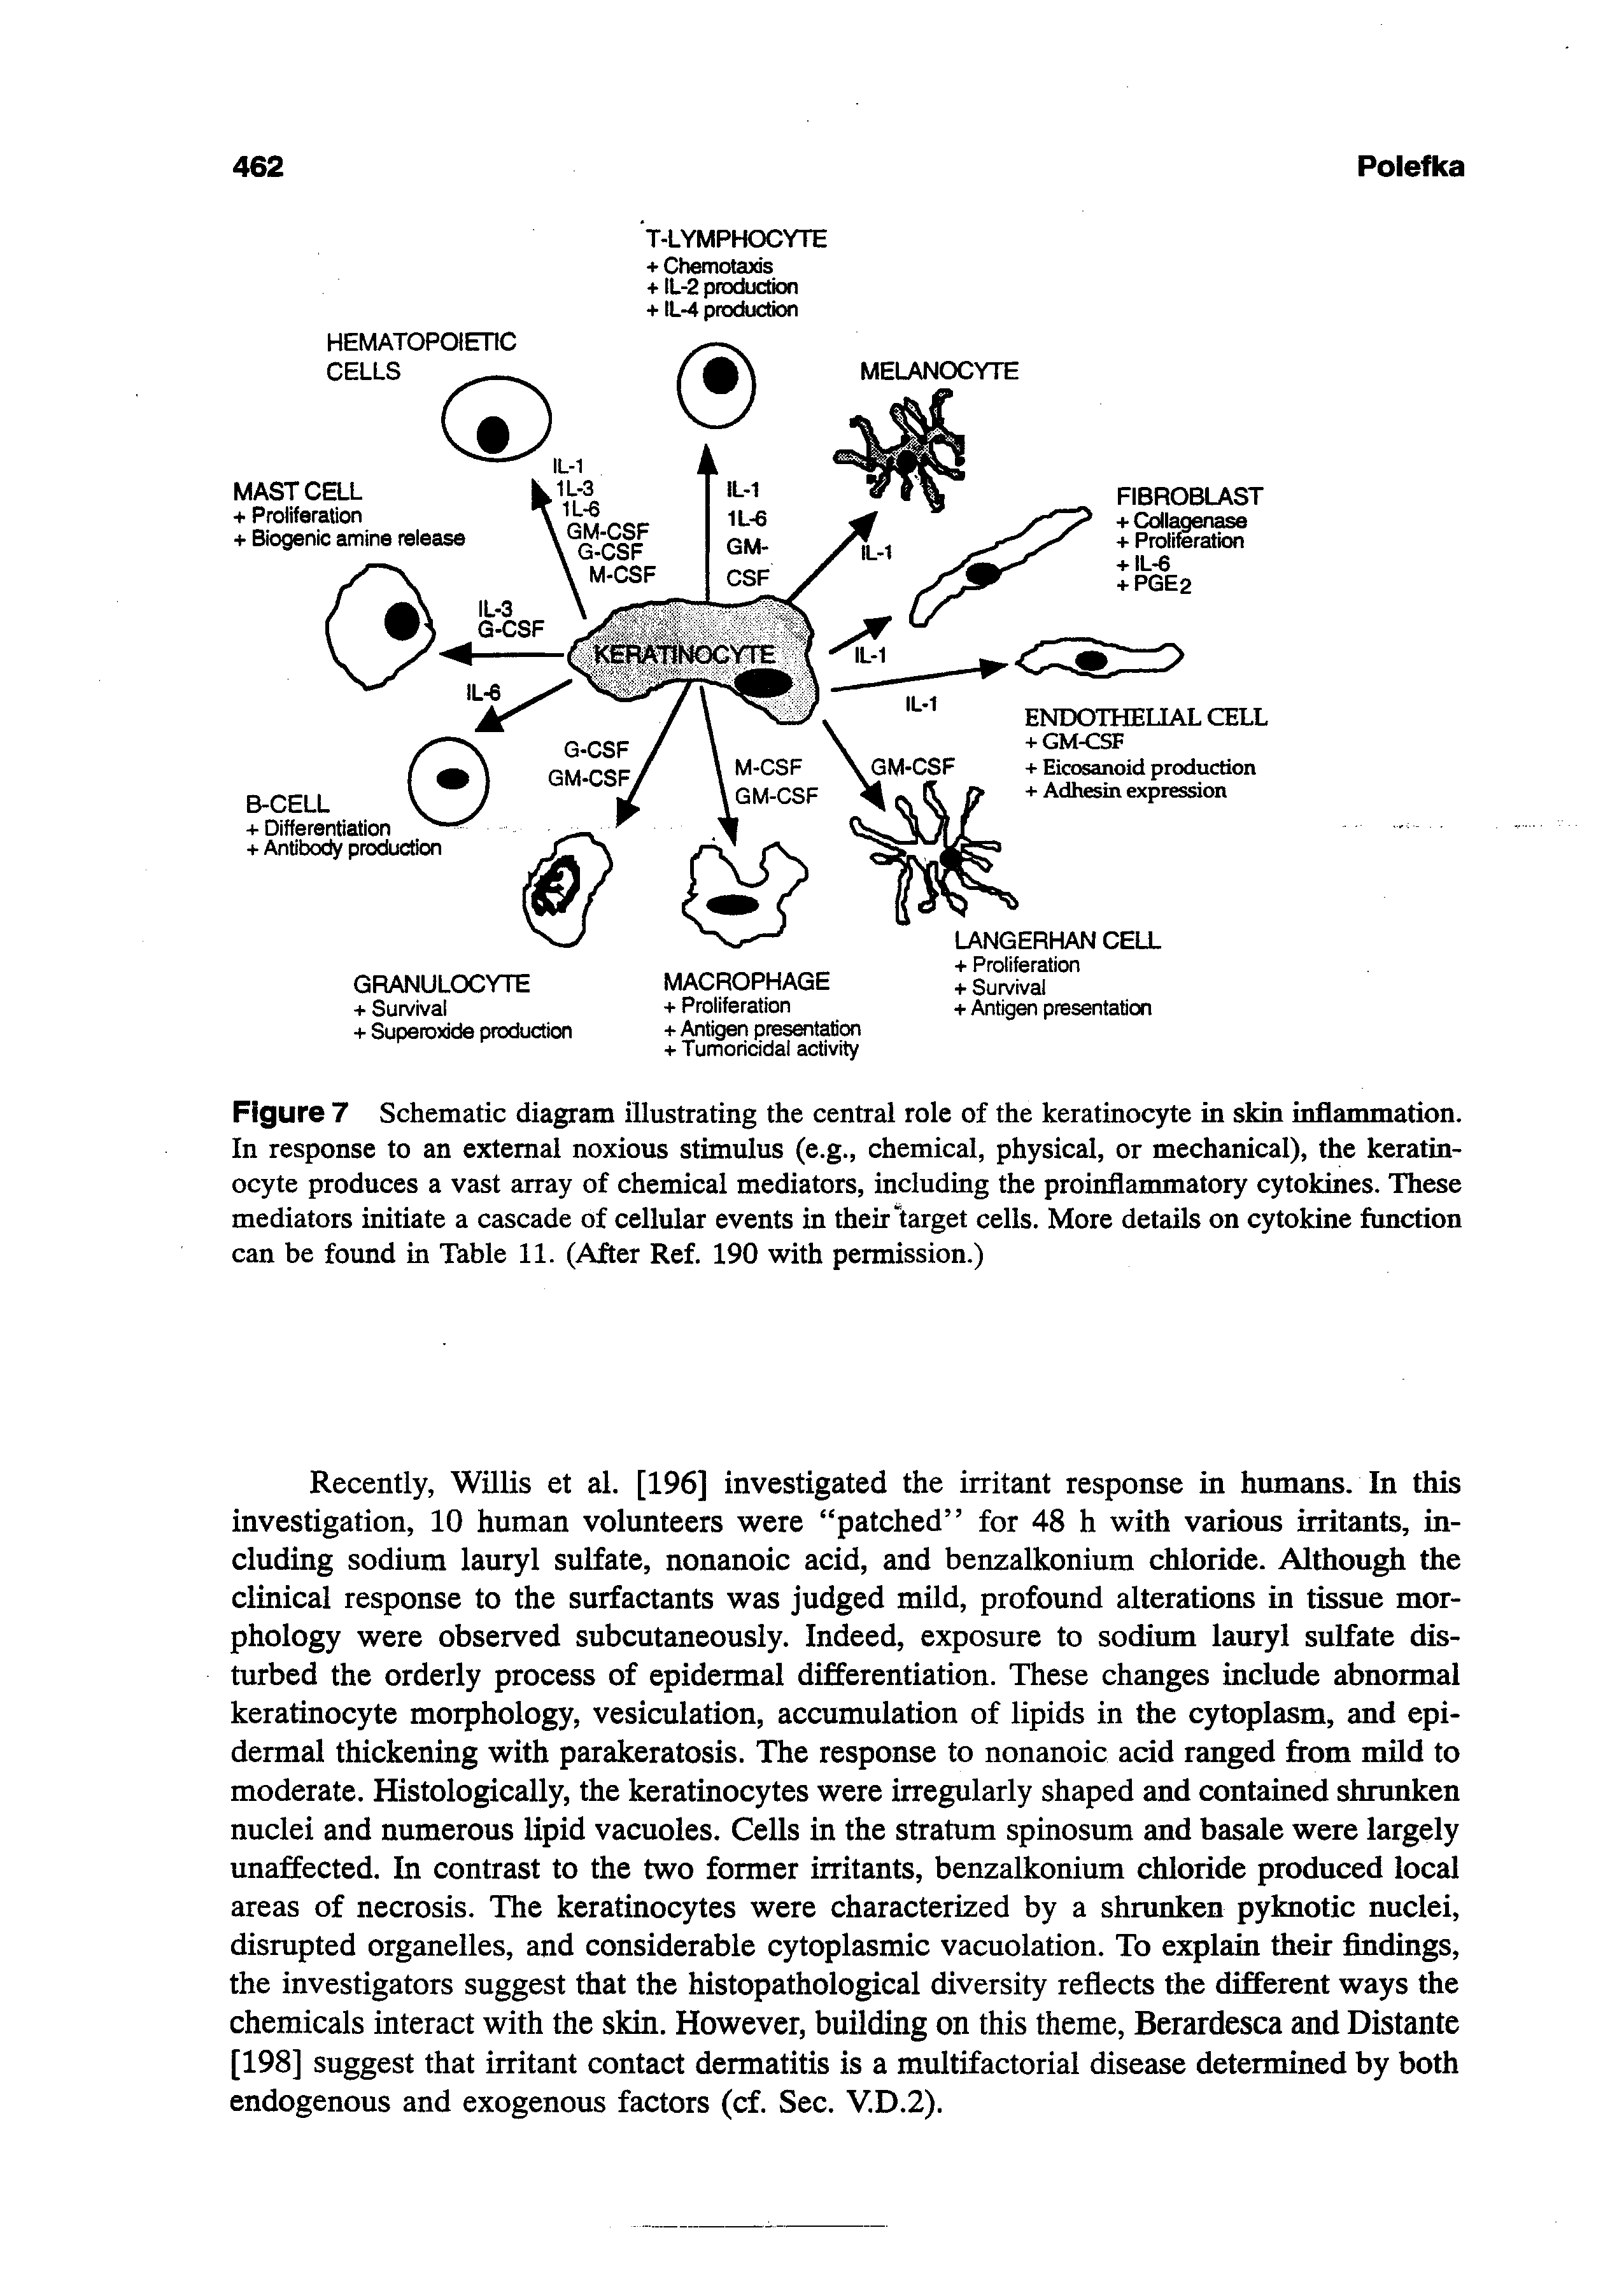 Figure 7 Schematic diagram illustrating the central role of the keratinocyte in skin inflammation. In response to an external noxious stimulus (e.g., chemical, physical, or mechanical), the keratinocyte produces a vast array of chemical mediators, including the proinflammatory cytokines. These mediators initiate a cascade of cellular events in their target cells. More details on cytokine function can be found in Table 11. (After Ref. 190 with permission.)...